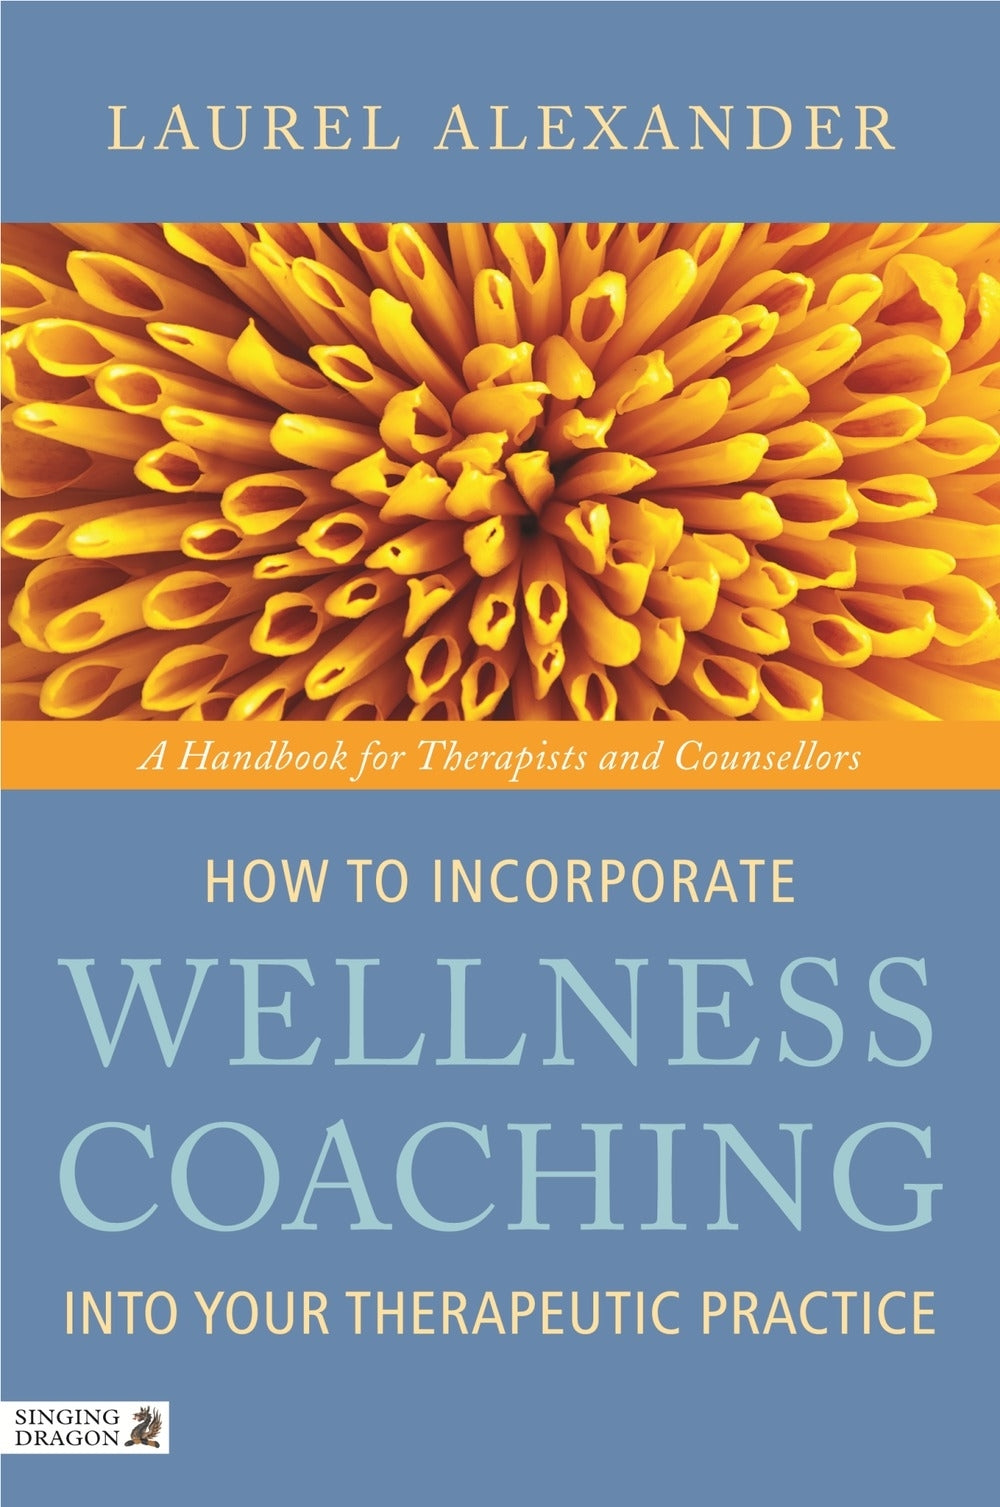 How to Incorporate Wellness Coaching into Your Therapeutic Practice by Laurel Alexander